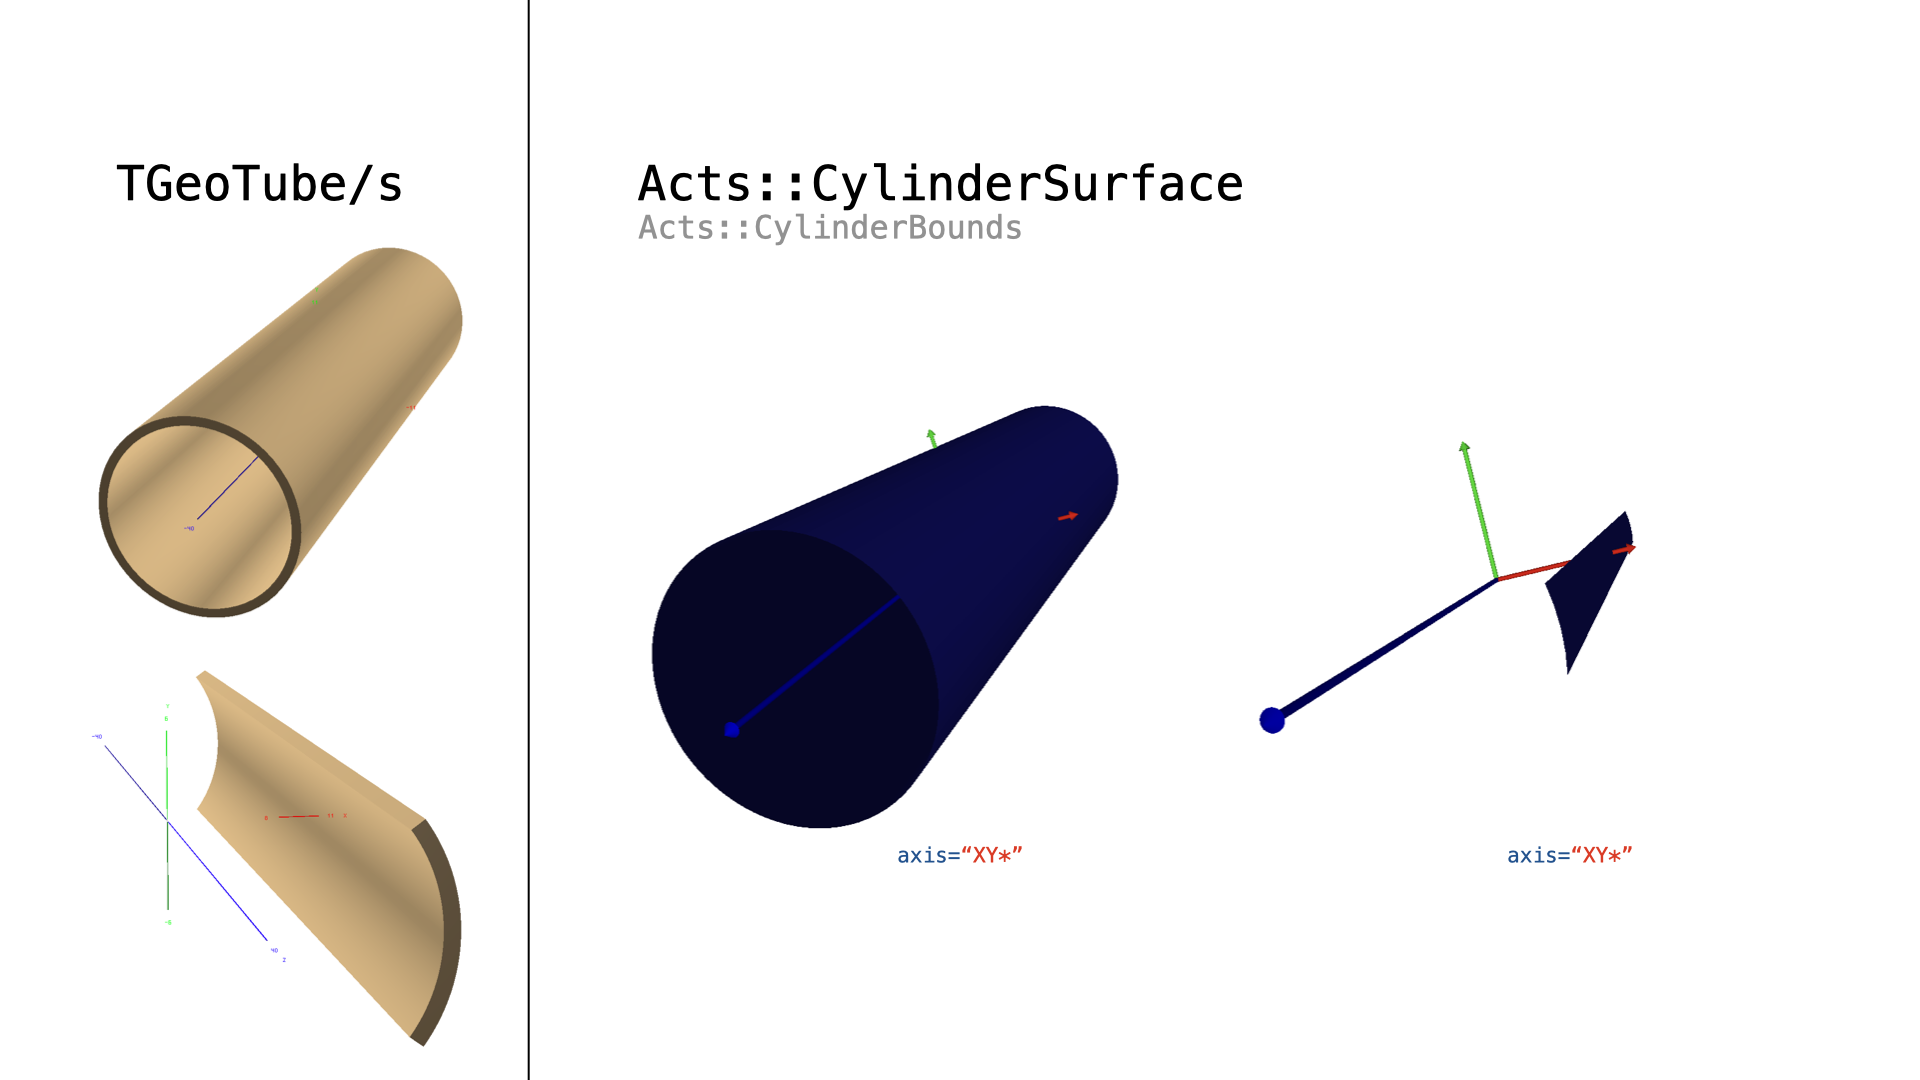 Conversion of a ``TGeoTube`` shape into a ``Acts::CylinderSurface`` with ``Acts::CylinderBounds``. The axes definitions has to be ``(x/X)(y/Y)(*/*)``.